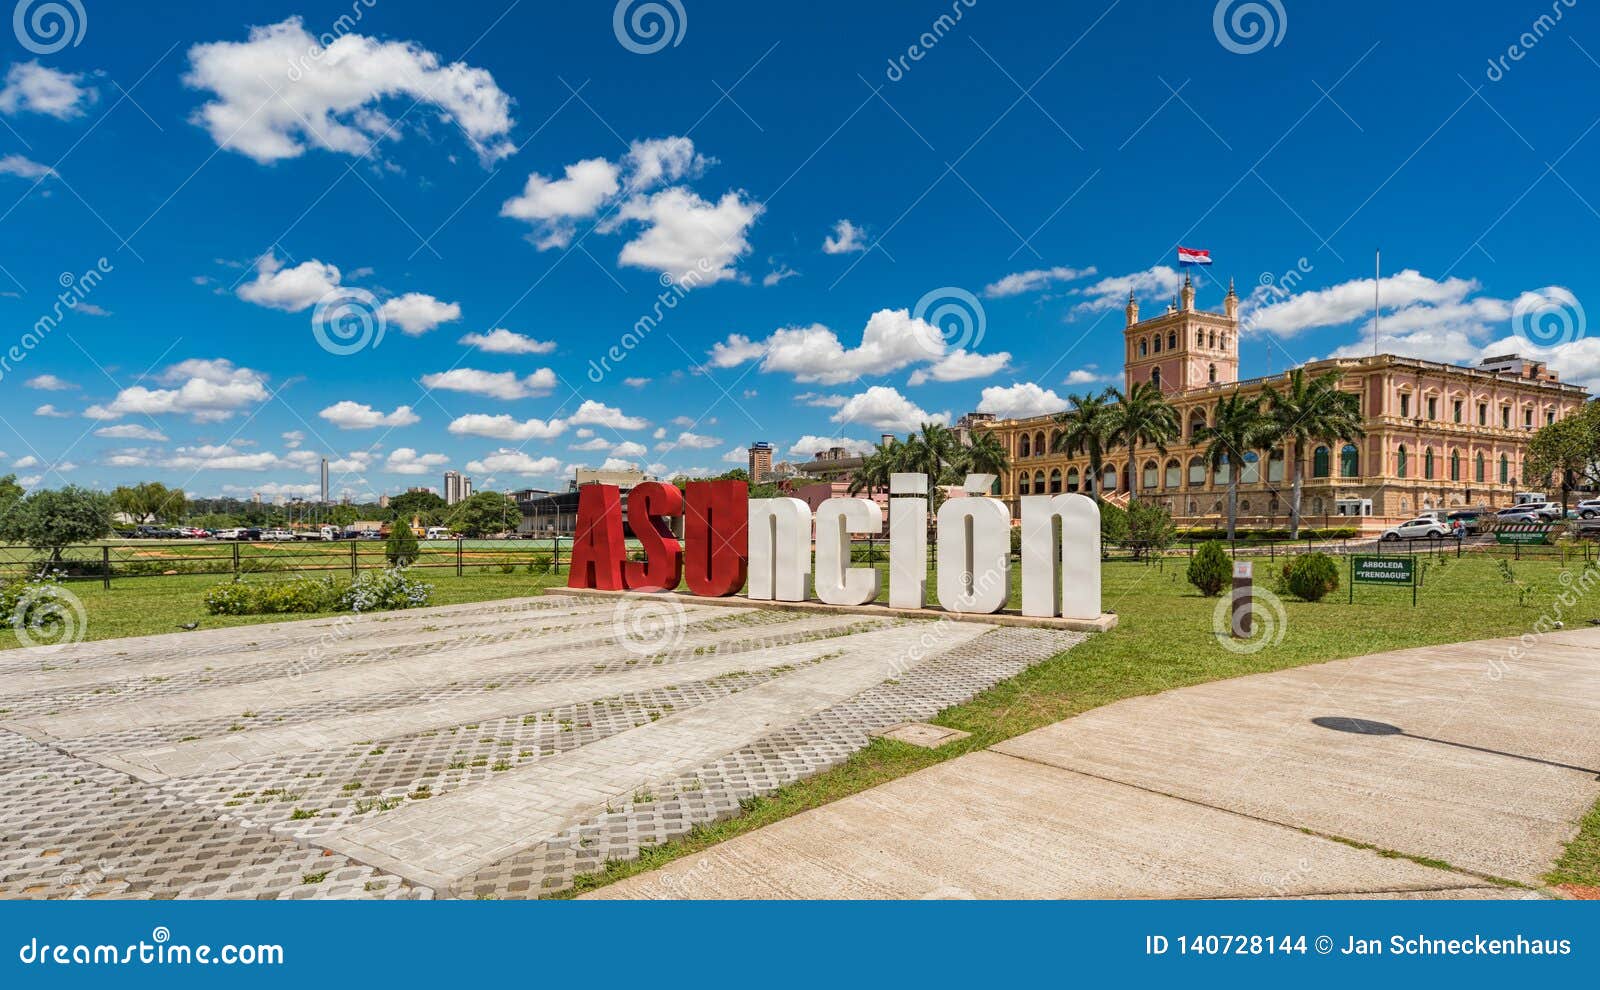 asuncion letters in front of the presidential palace in the capital of paraguay.